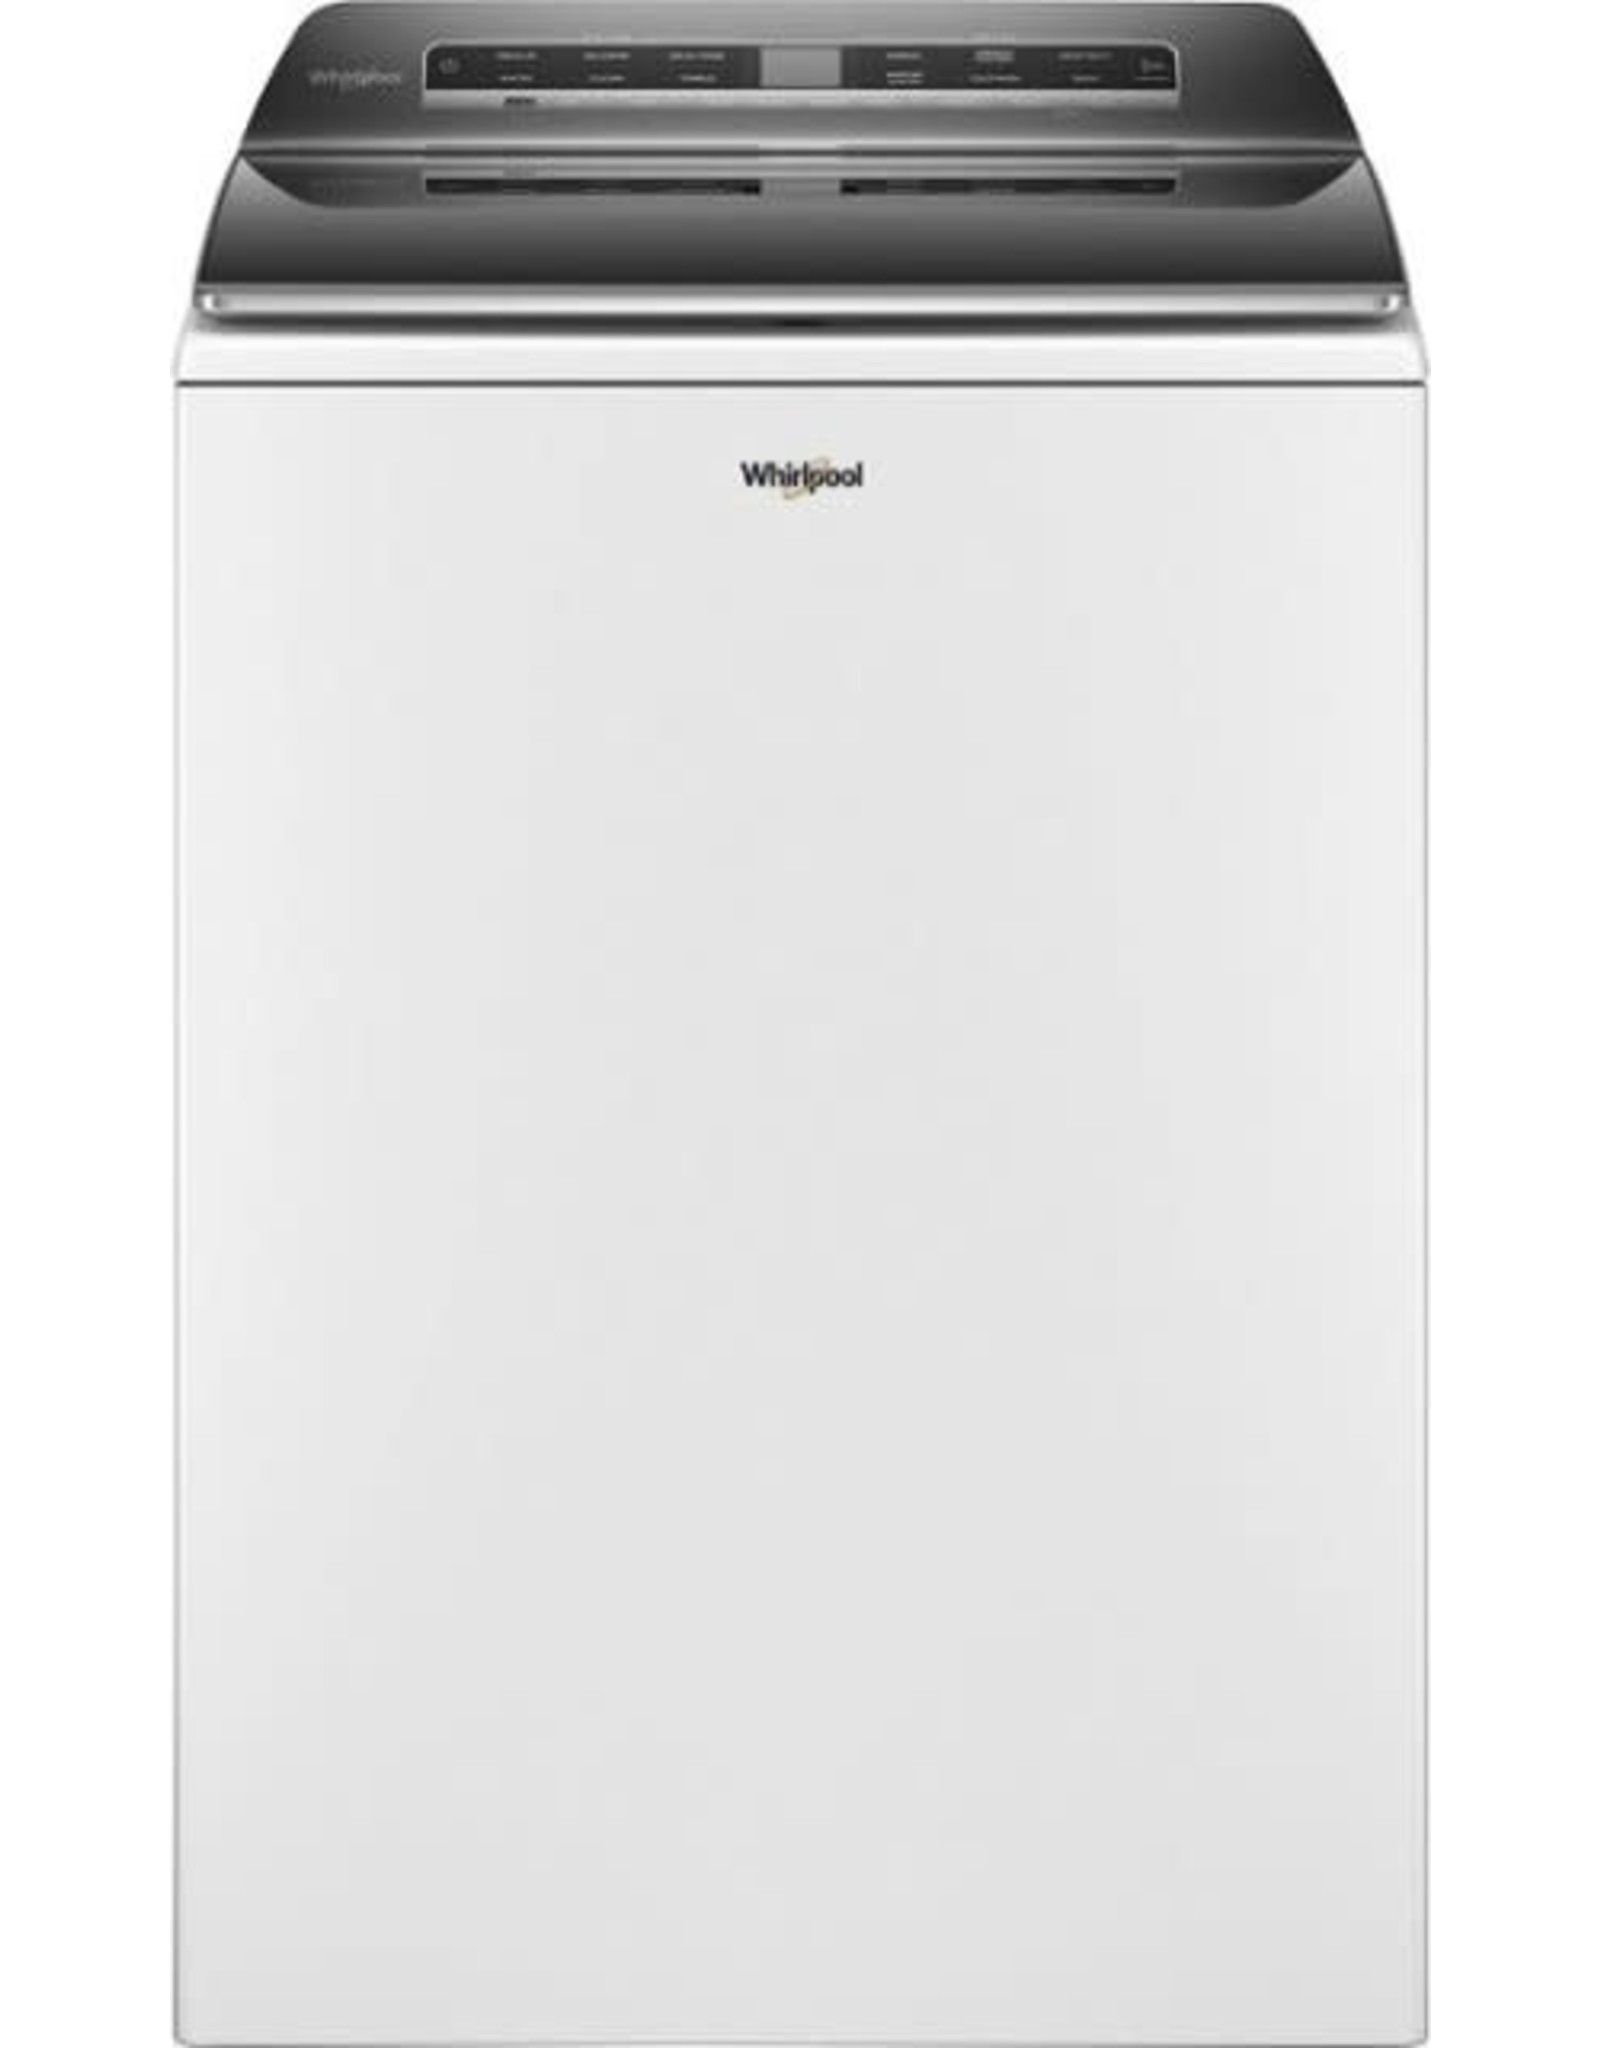 WHIRLPOOL WTW8127LW  Whirlpool - 5.2-5.3 Cu. Ft. Smart Top Load Washer with 2 in 1 Removable Agitator - White